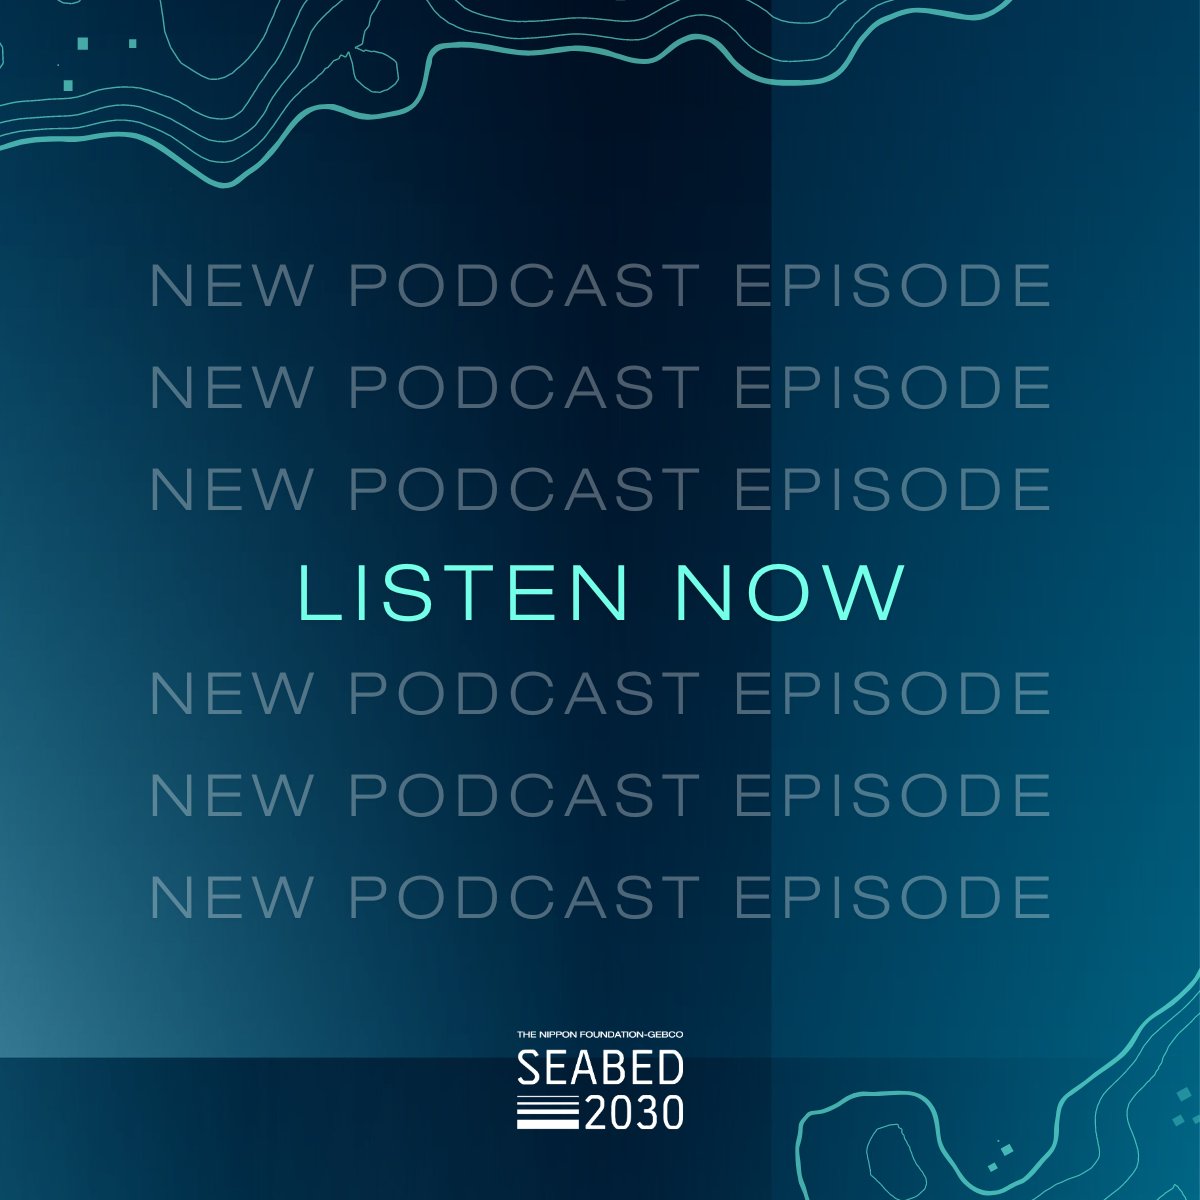 🎙️ Are you subscribed to our #podcast? This month, we speak with our own @ShereenSharma who has an extensive background in #hydrography and #geospatial sciences. 👉 Search The Seabed 2030 Podcast on Spotify, Amazon Music, or Buzzsprout or listen below buzzsprout.com/2093154/148207…